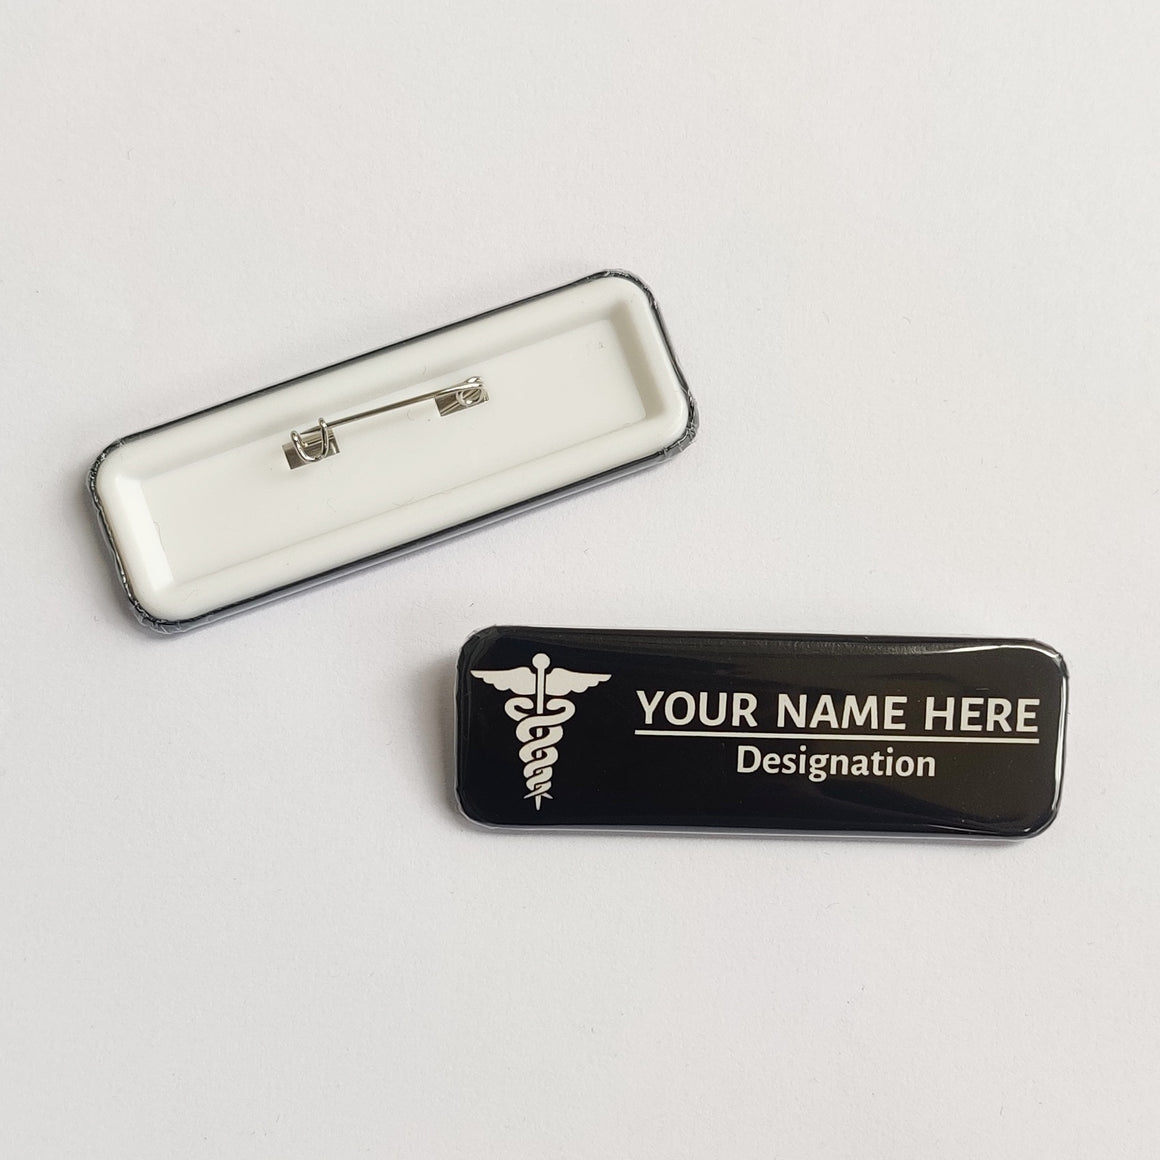 the-doctor-personalised-name-badge-22x80mm-creator